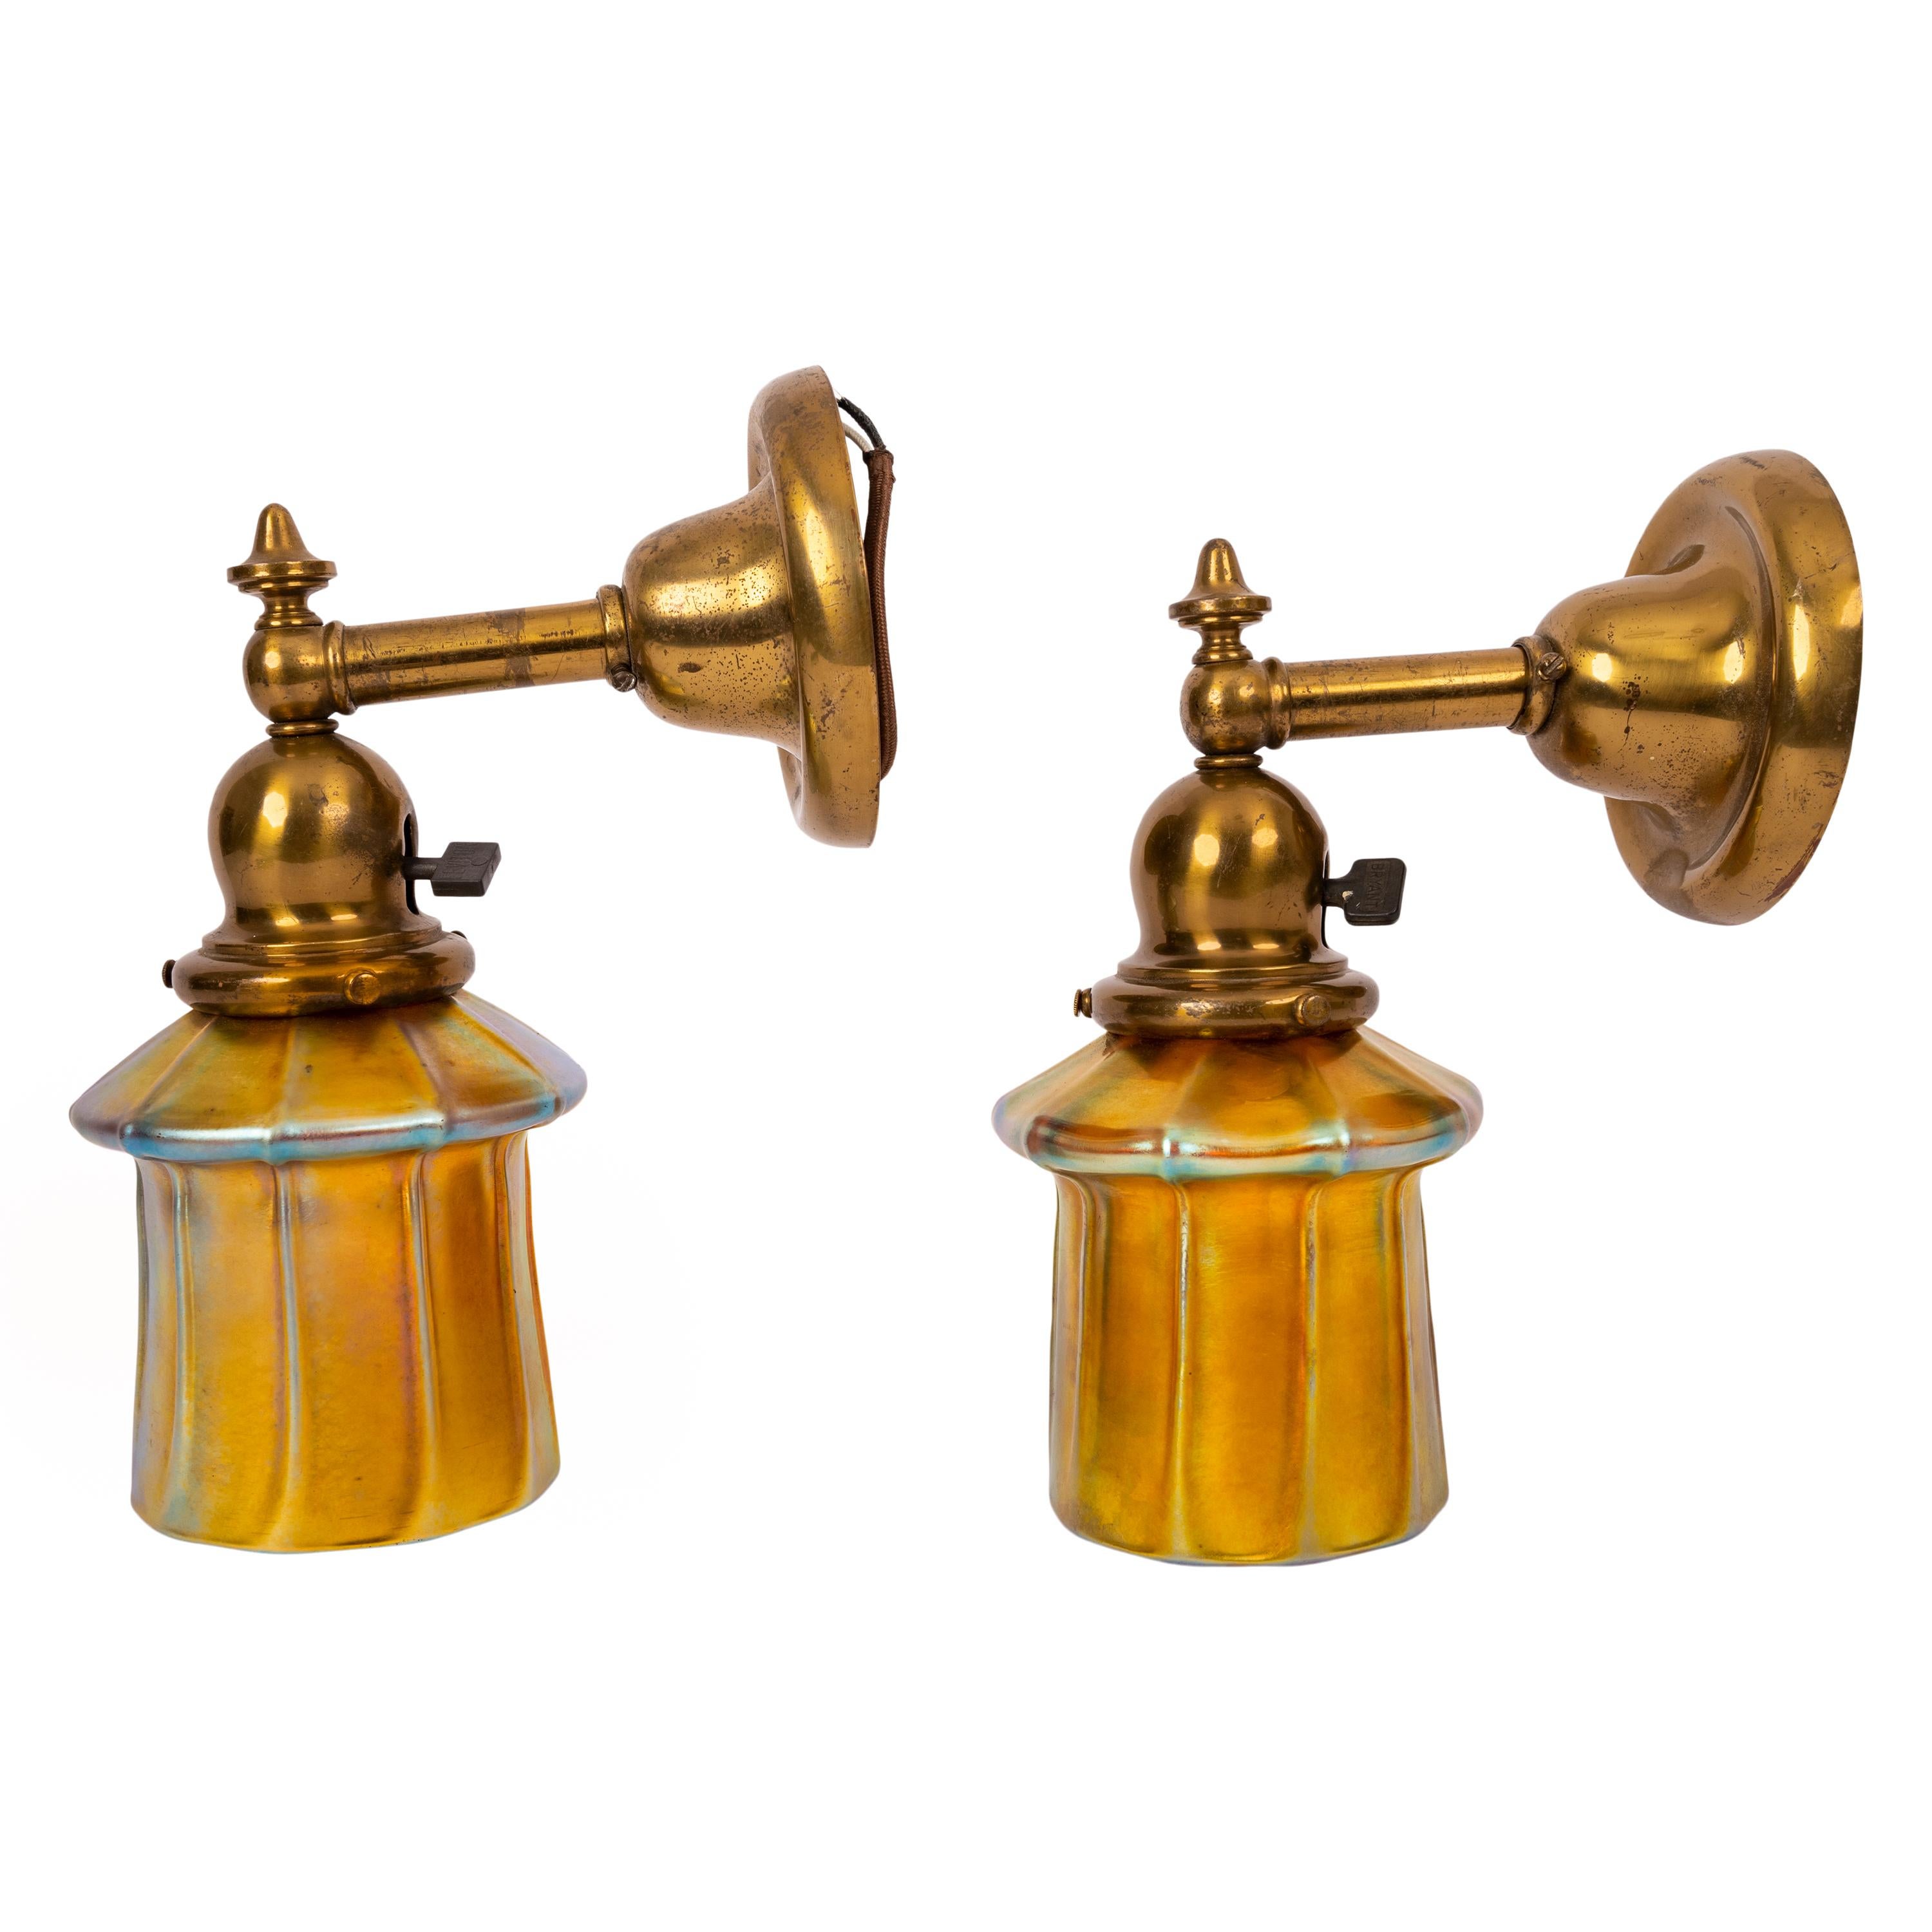 Early 20th Century Pair Antique Arts & Crafts Mission Brass Gold Aurene Steuben Glass Wall Sconces